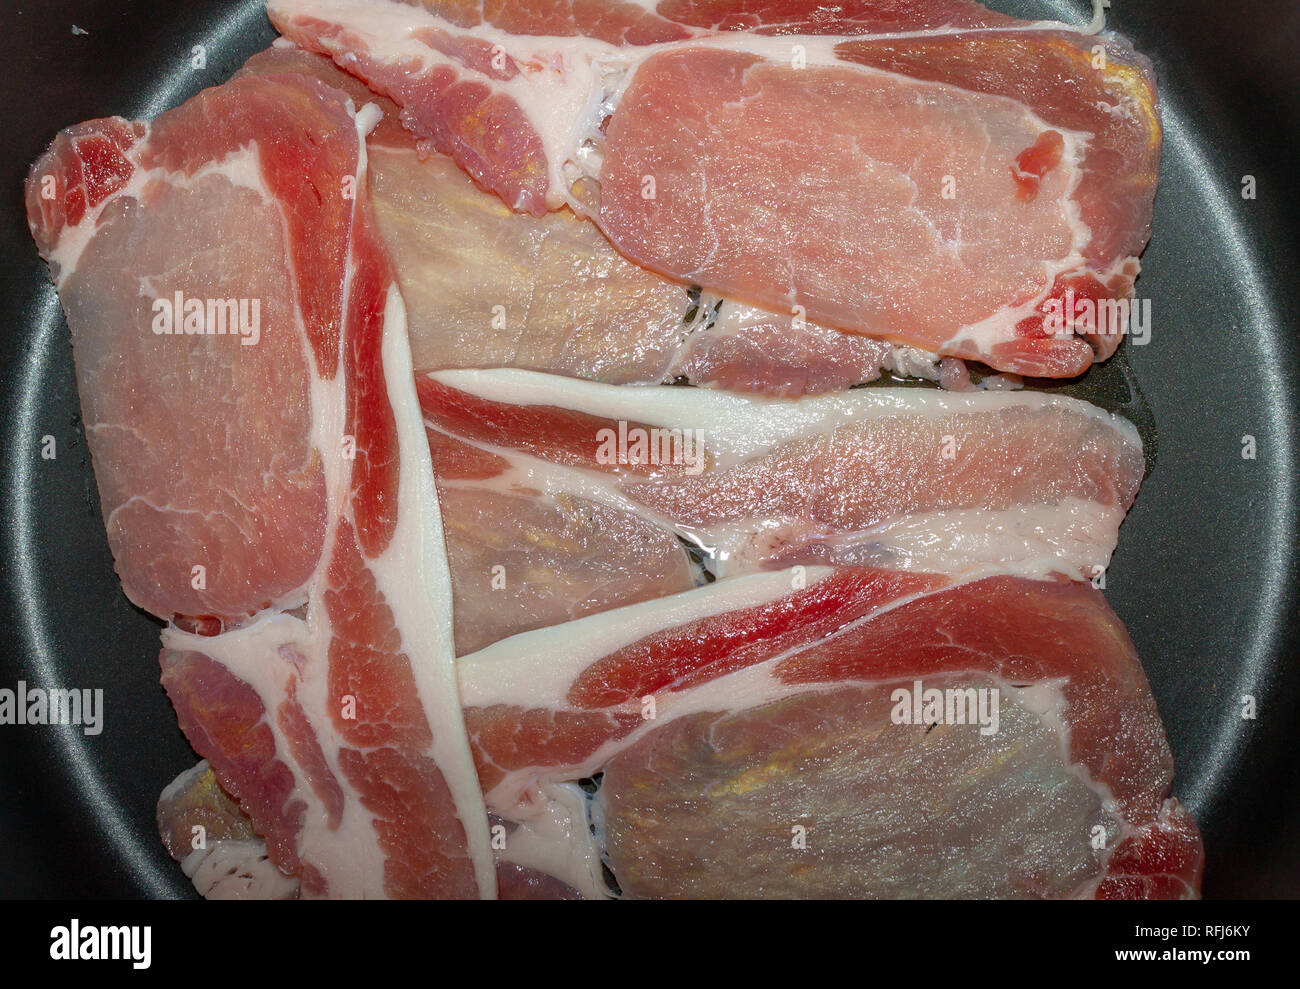 close up of slices of bacon or rashers in a frying pan Stock Photo